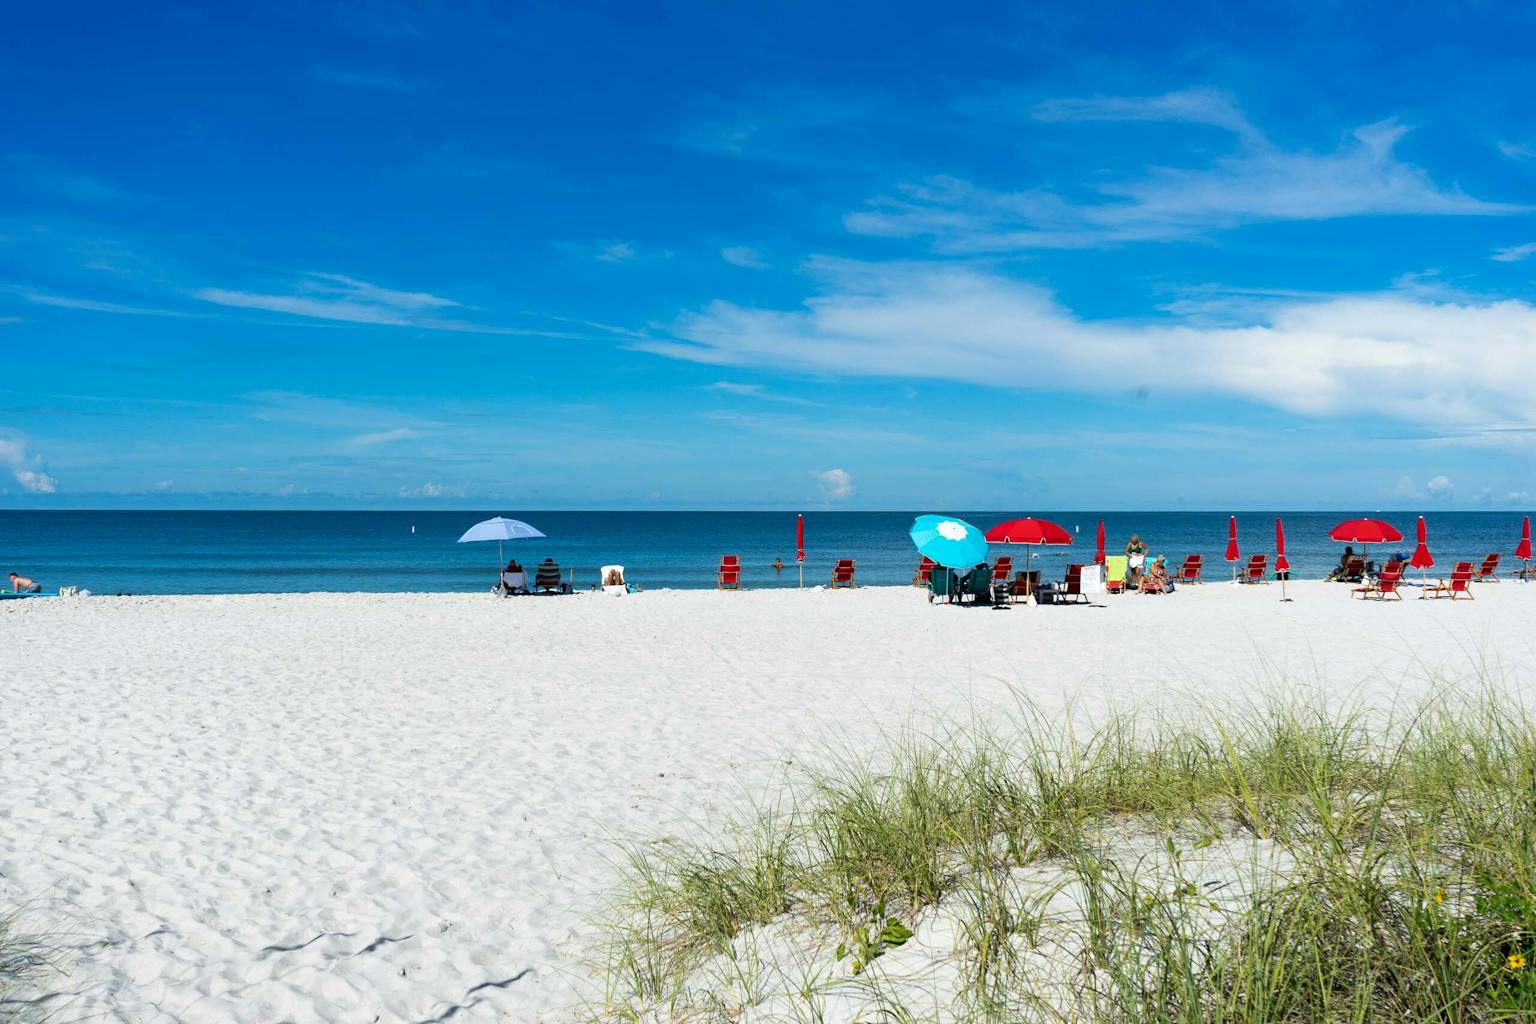 One of the most popular beaches in Naples, Lowdermilk Park